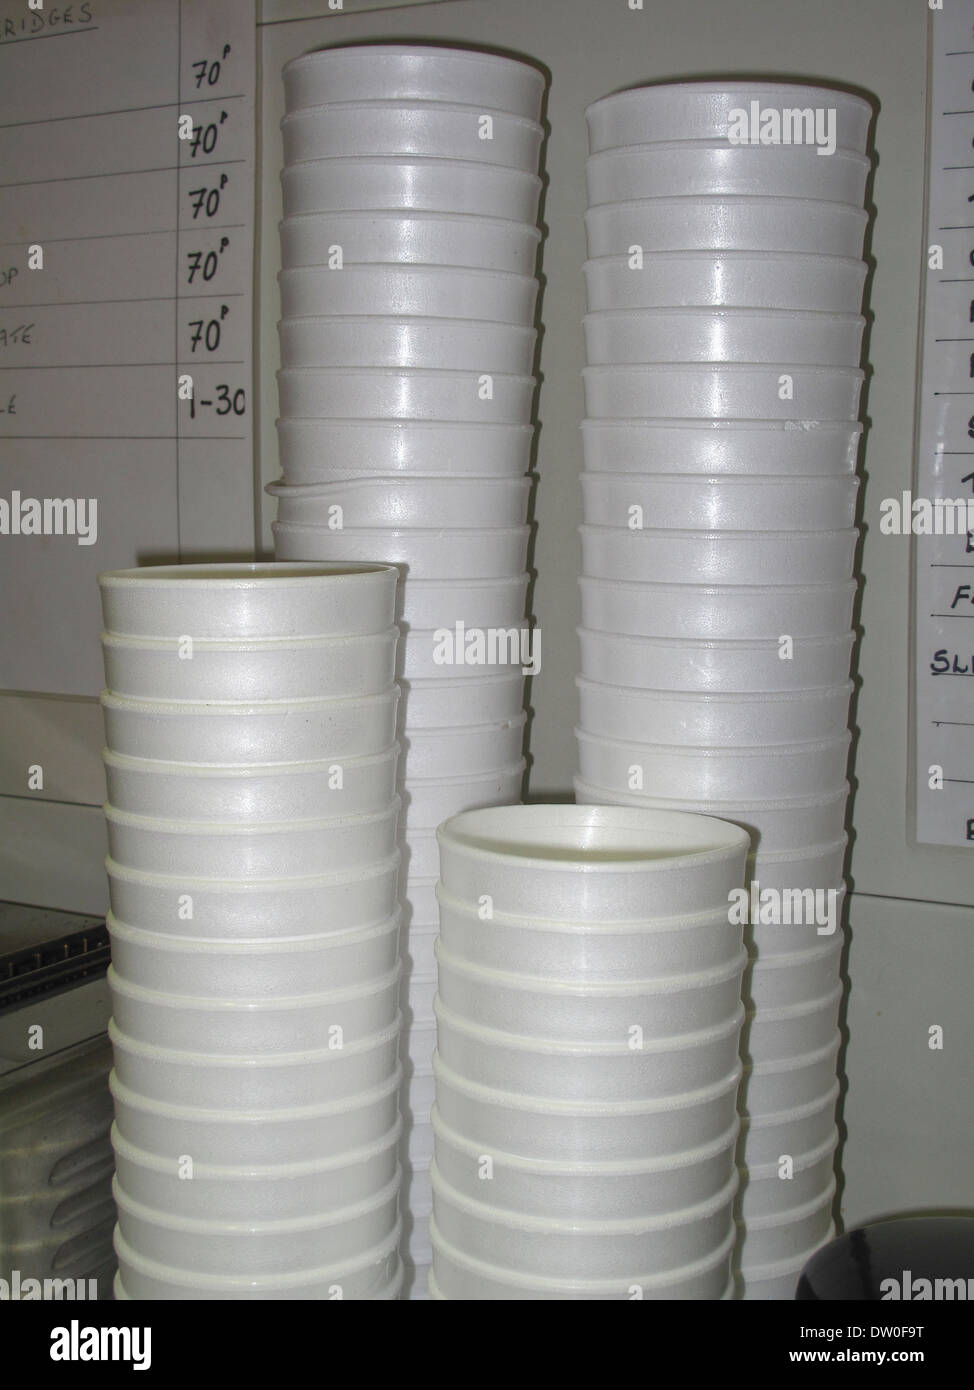 Stacks of polystyrene take away hot drink cups Stock Photo